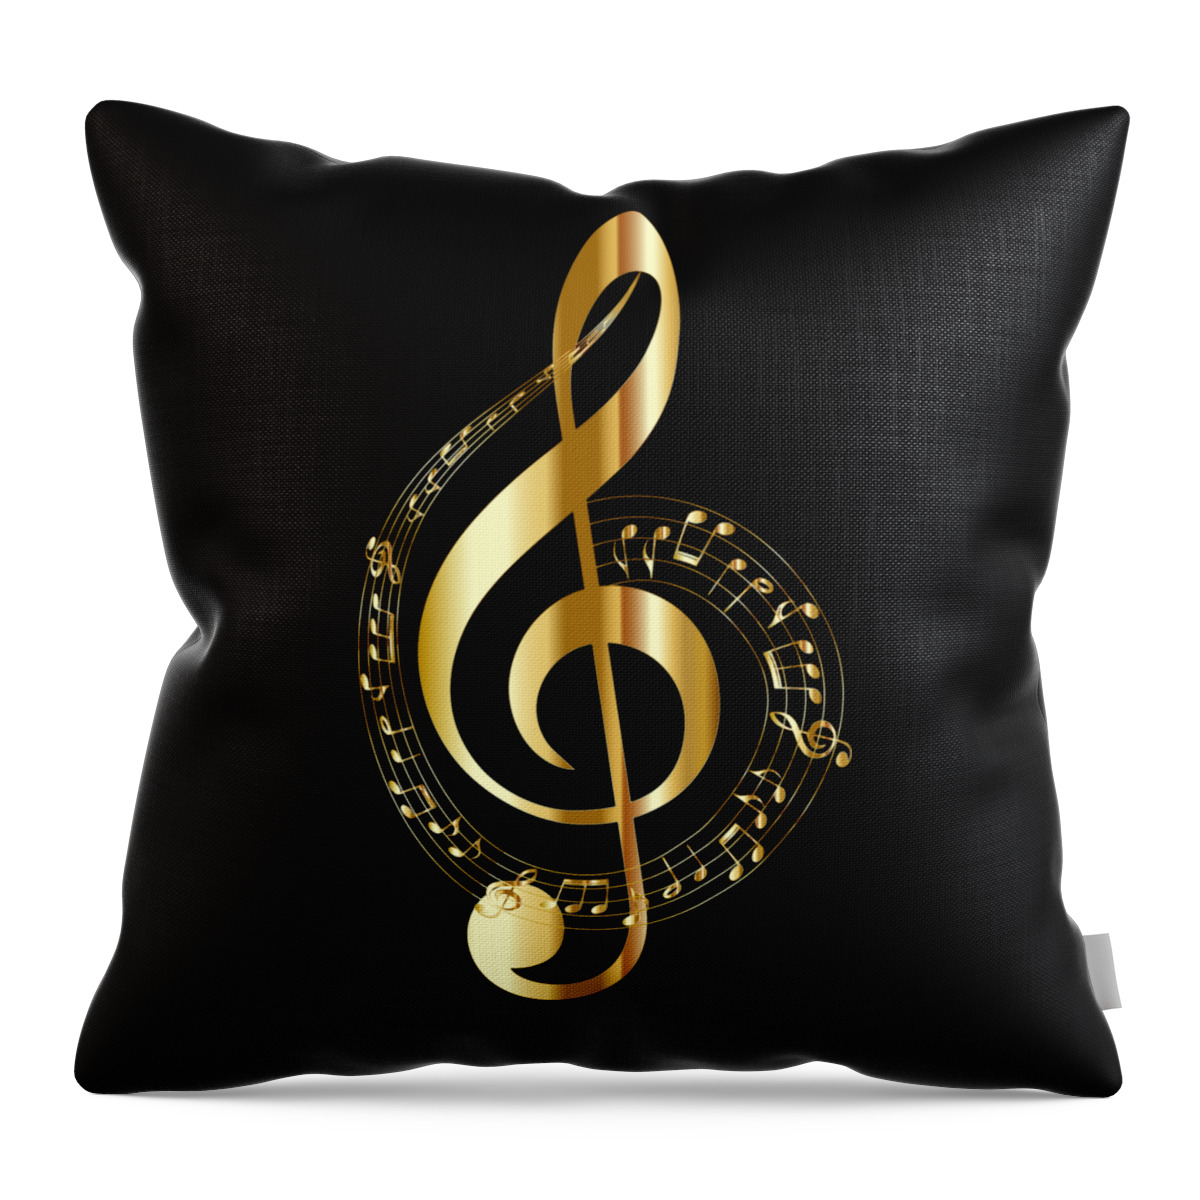 Music Throw Pillow featuring the photograph Music Treble Clef by Nancy Ayanna Wyatt